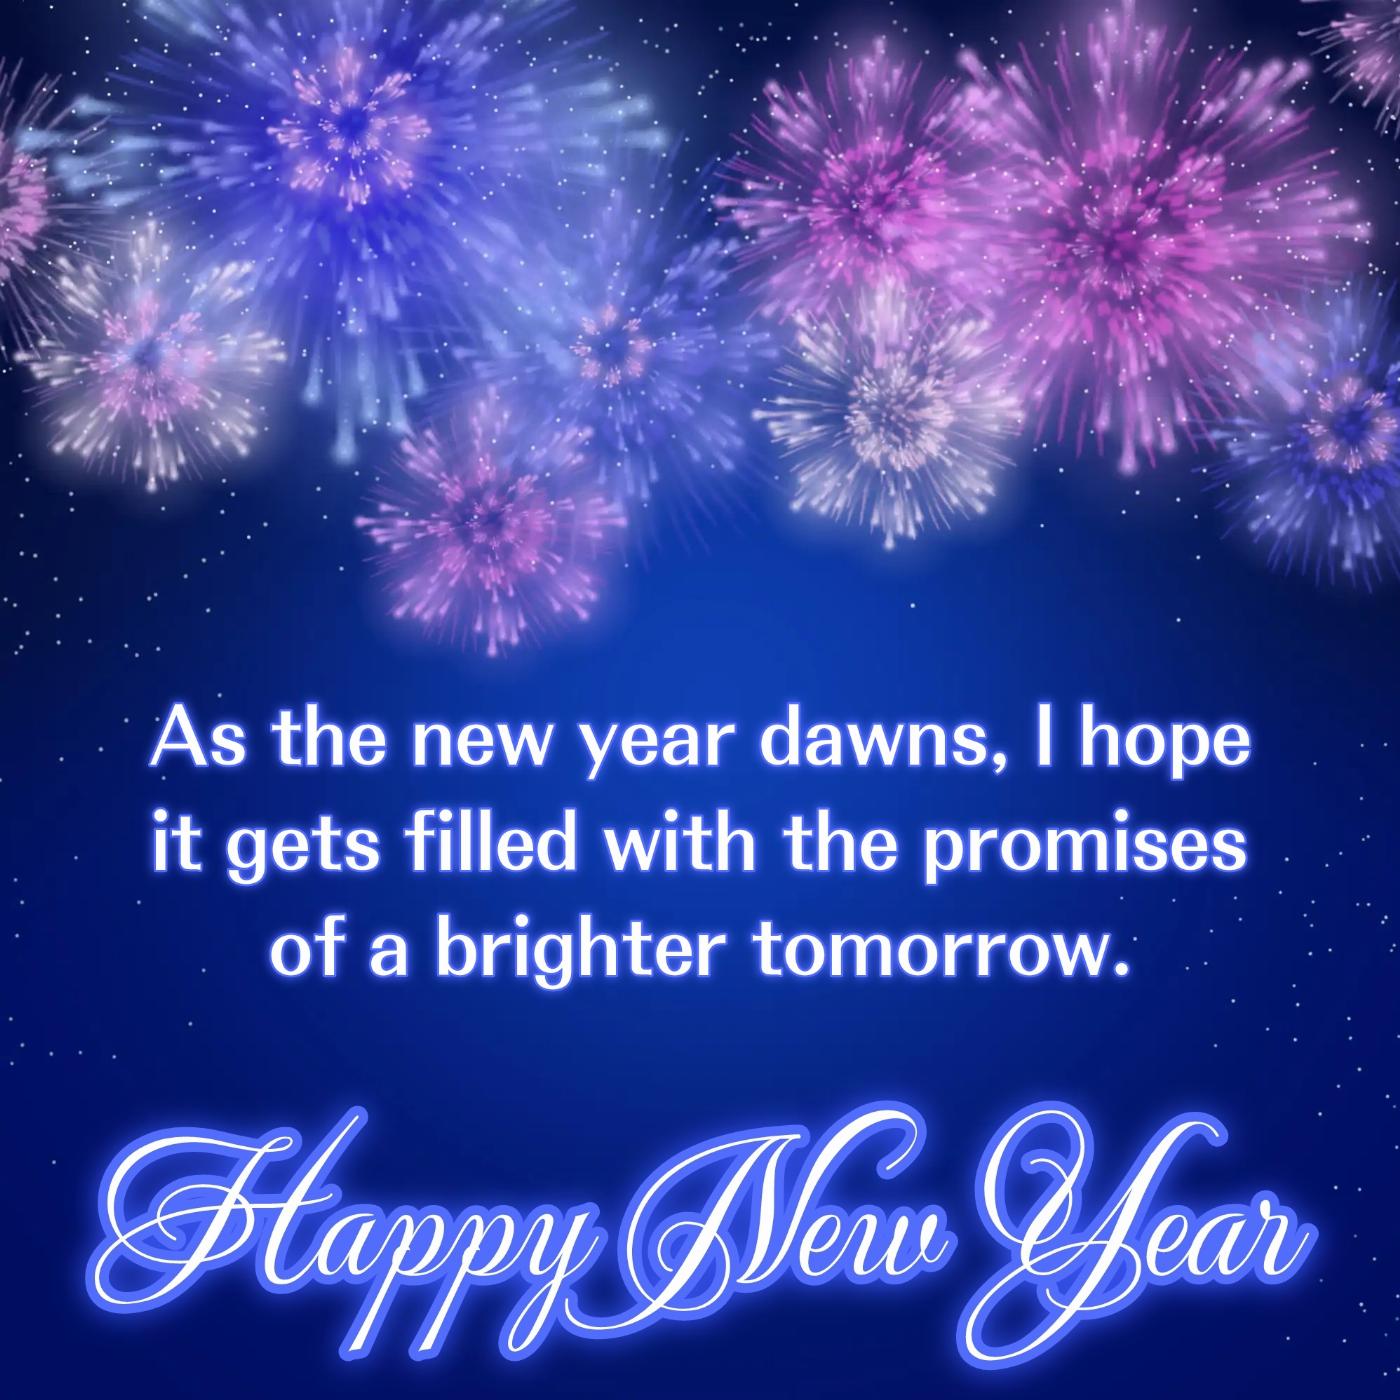 As the new year dawns I hope it gets filled with the promises